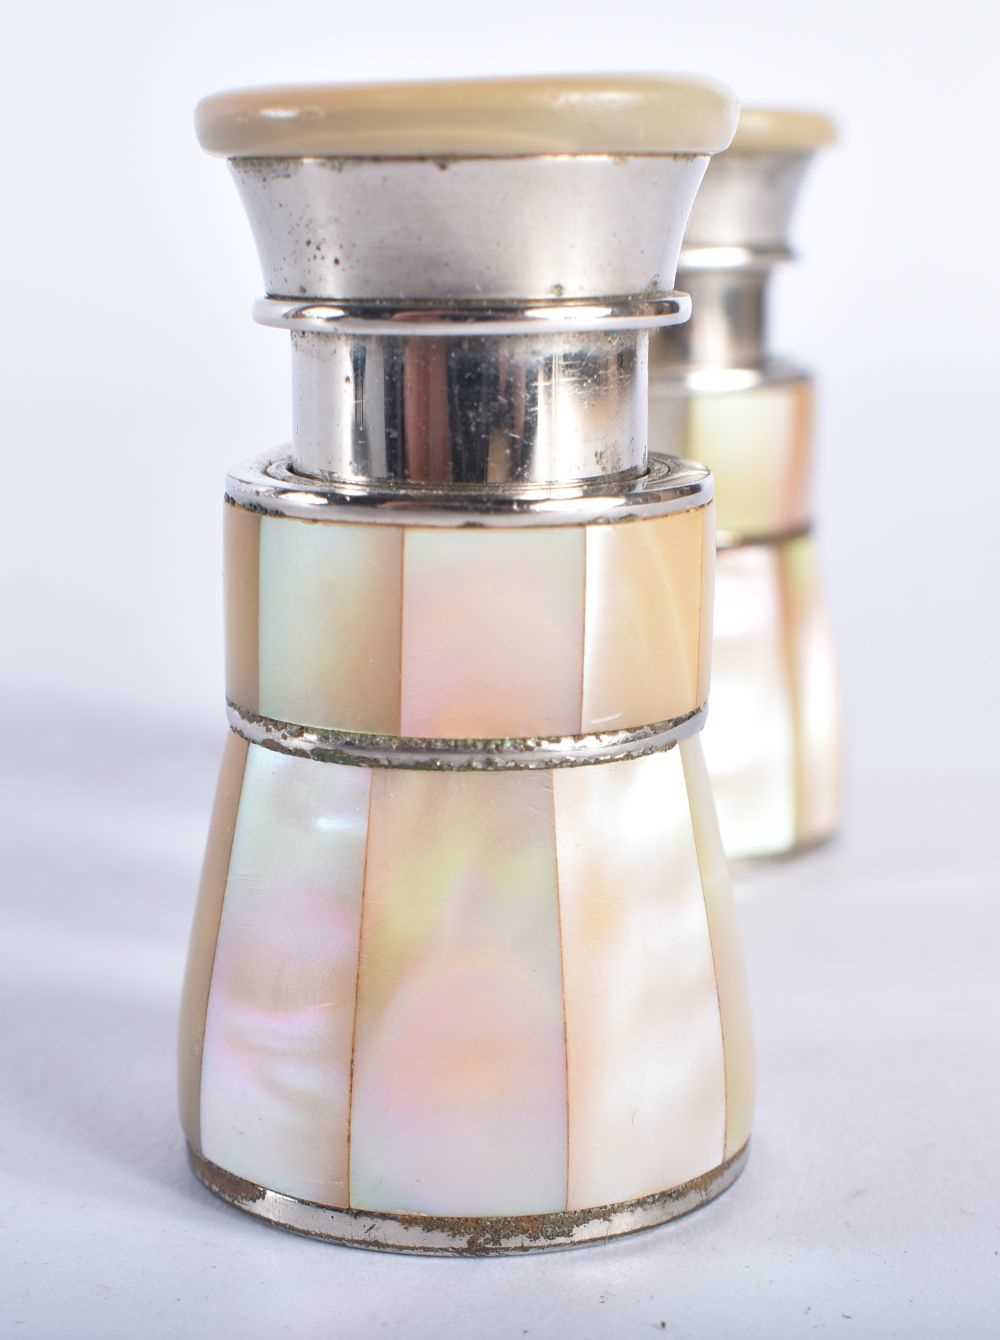 A PAIR OF MOTHER OF PEARL OPERA GLASSES. 5 cm x 9 cm extended. - Image 2 of 4